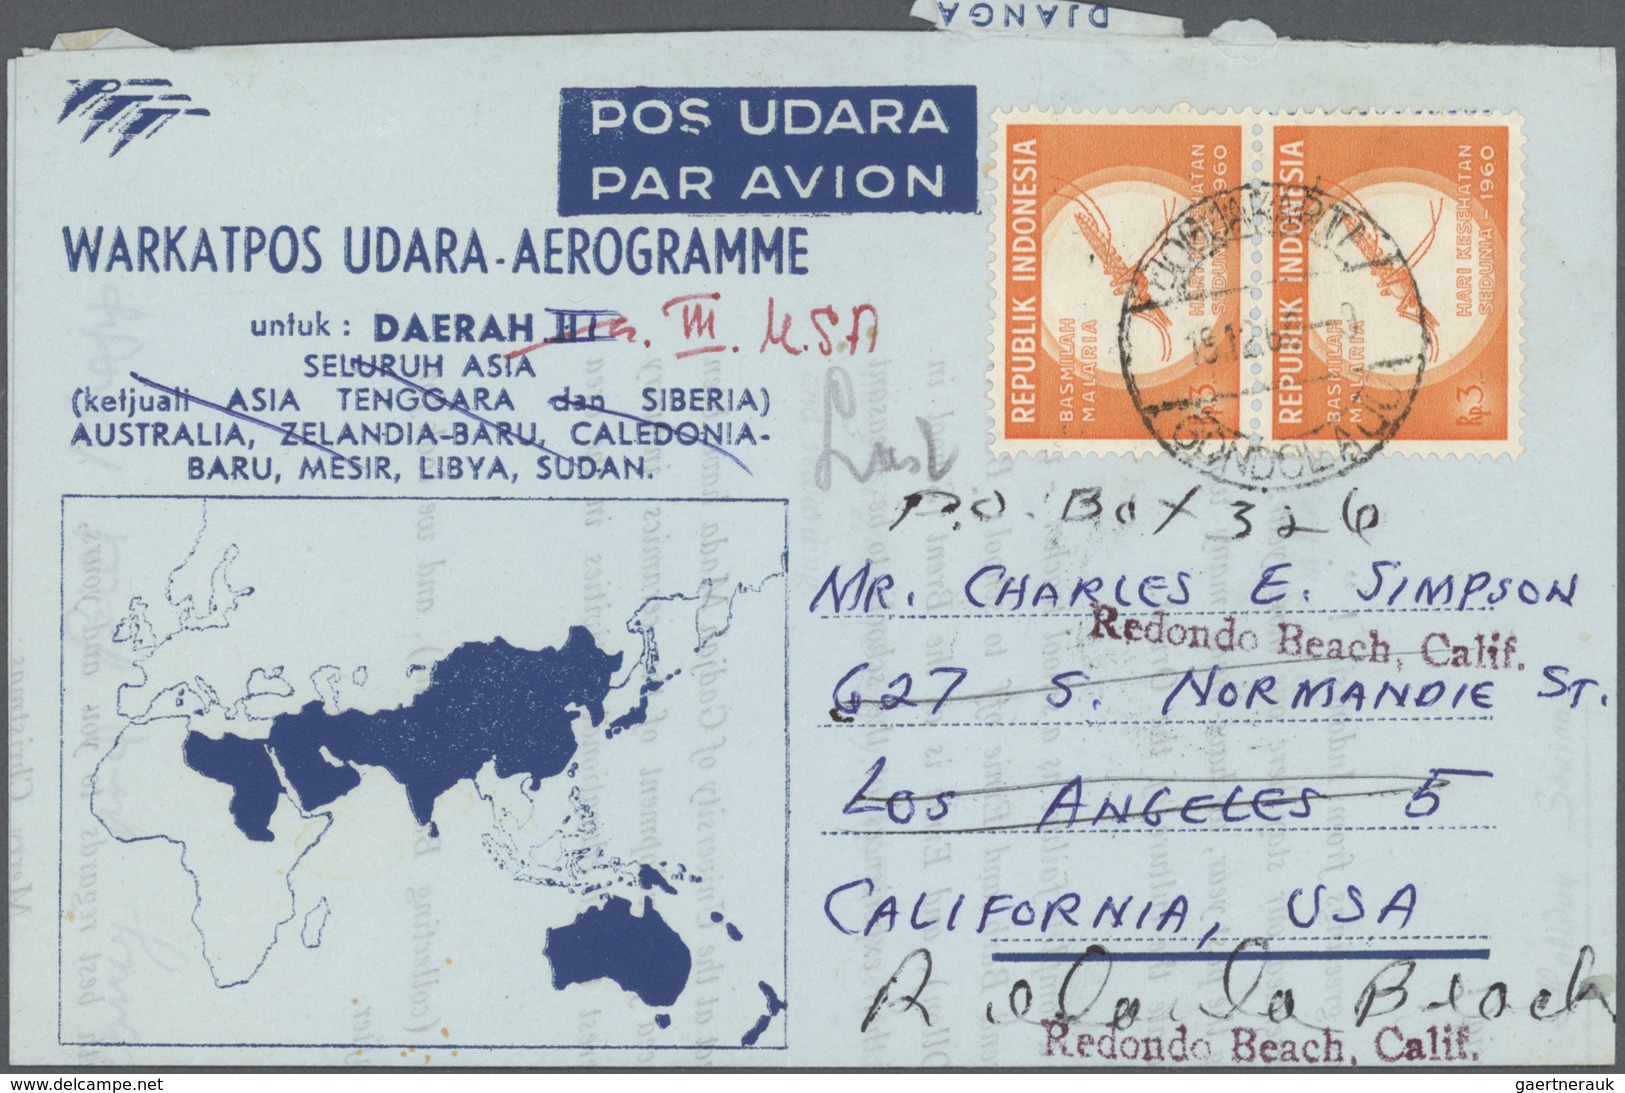 GA Indonesien: 1950/95 (ca.), the enormous stock/research collection of airletters and officially airle